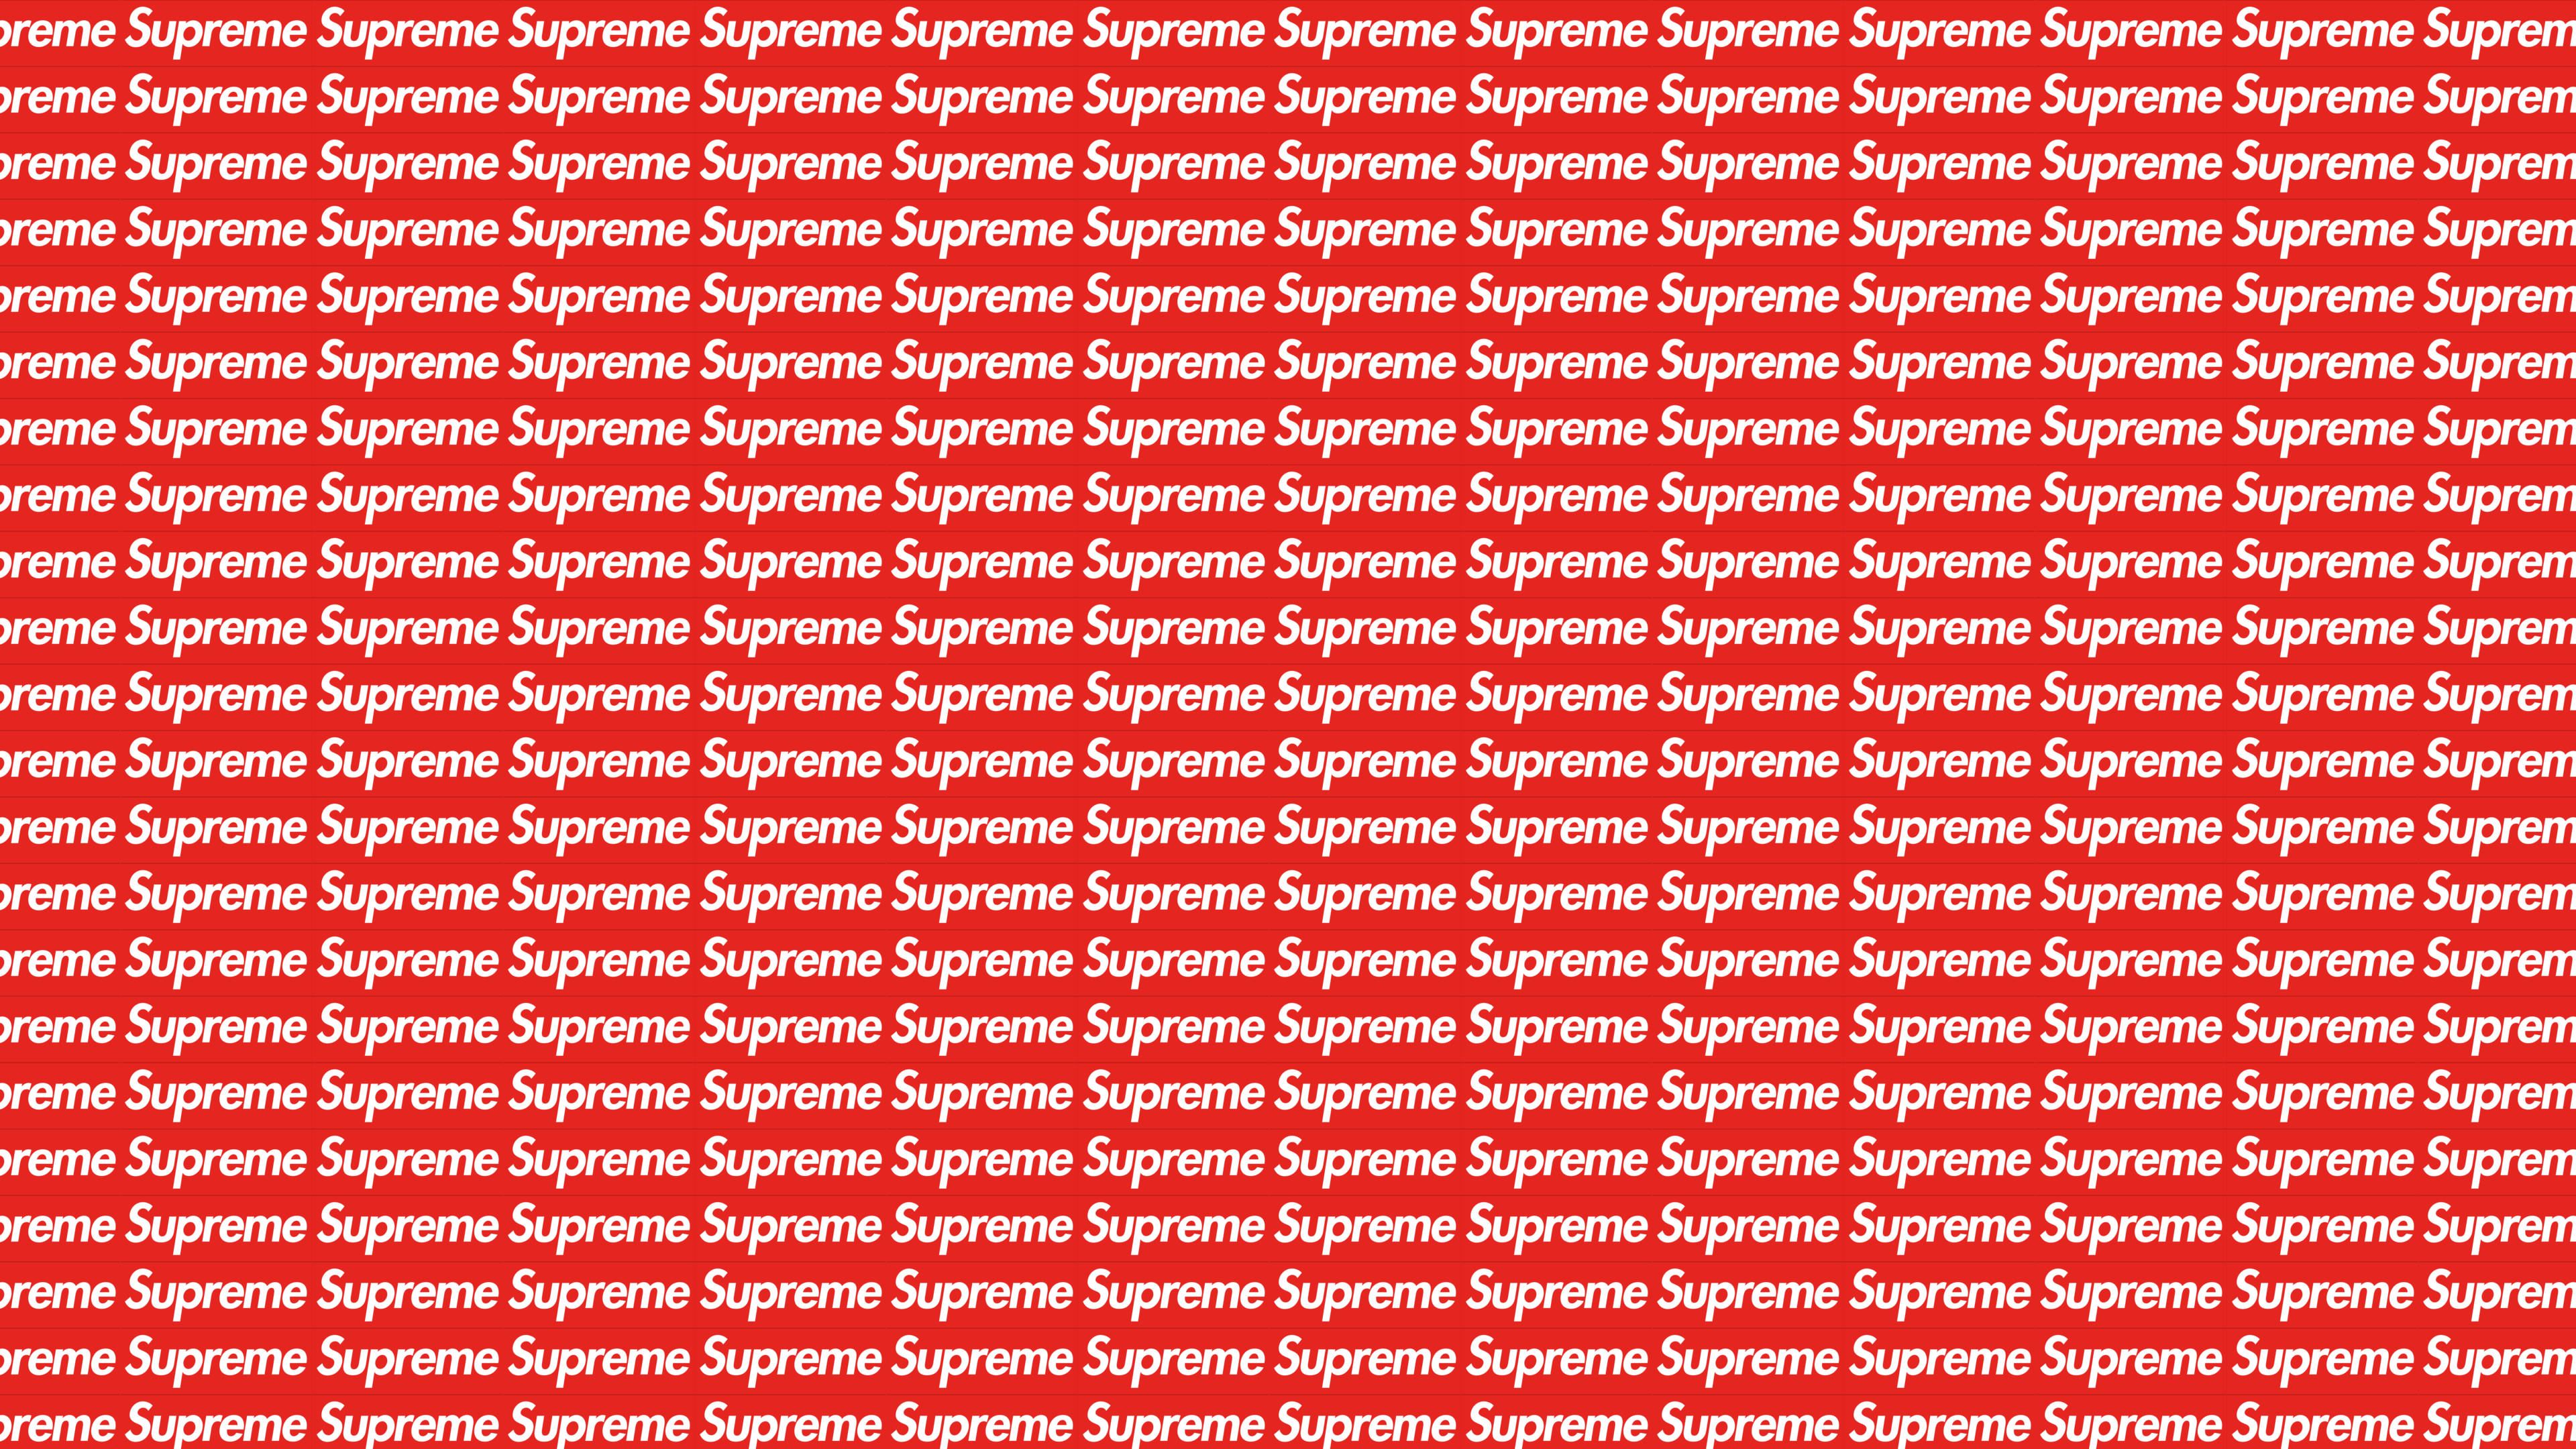 Supreme 4K wallpapers for your desktop or mobile screen free and easy to  download